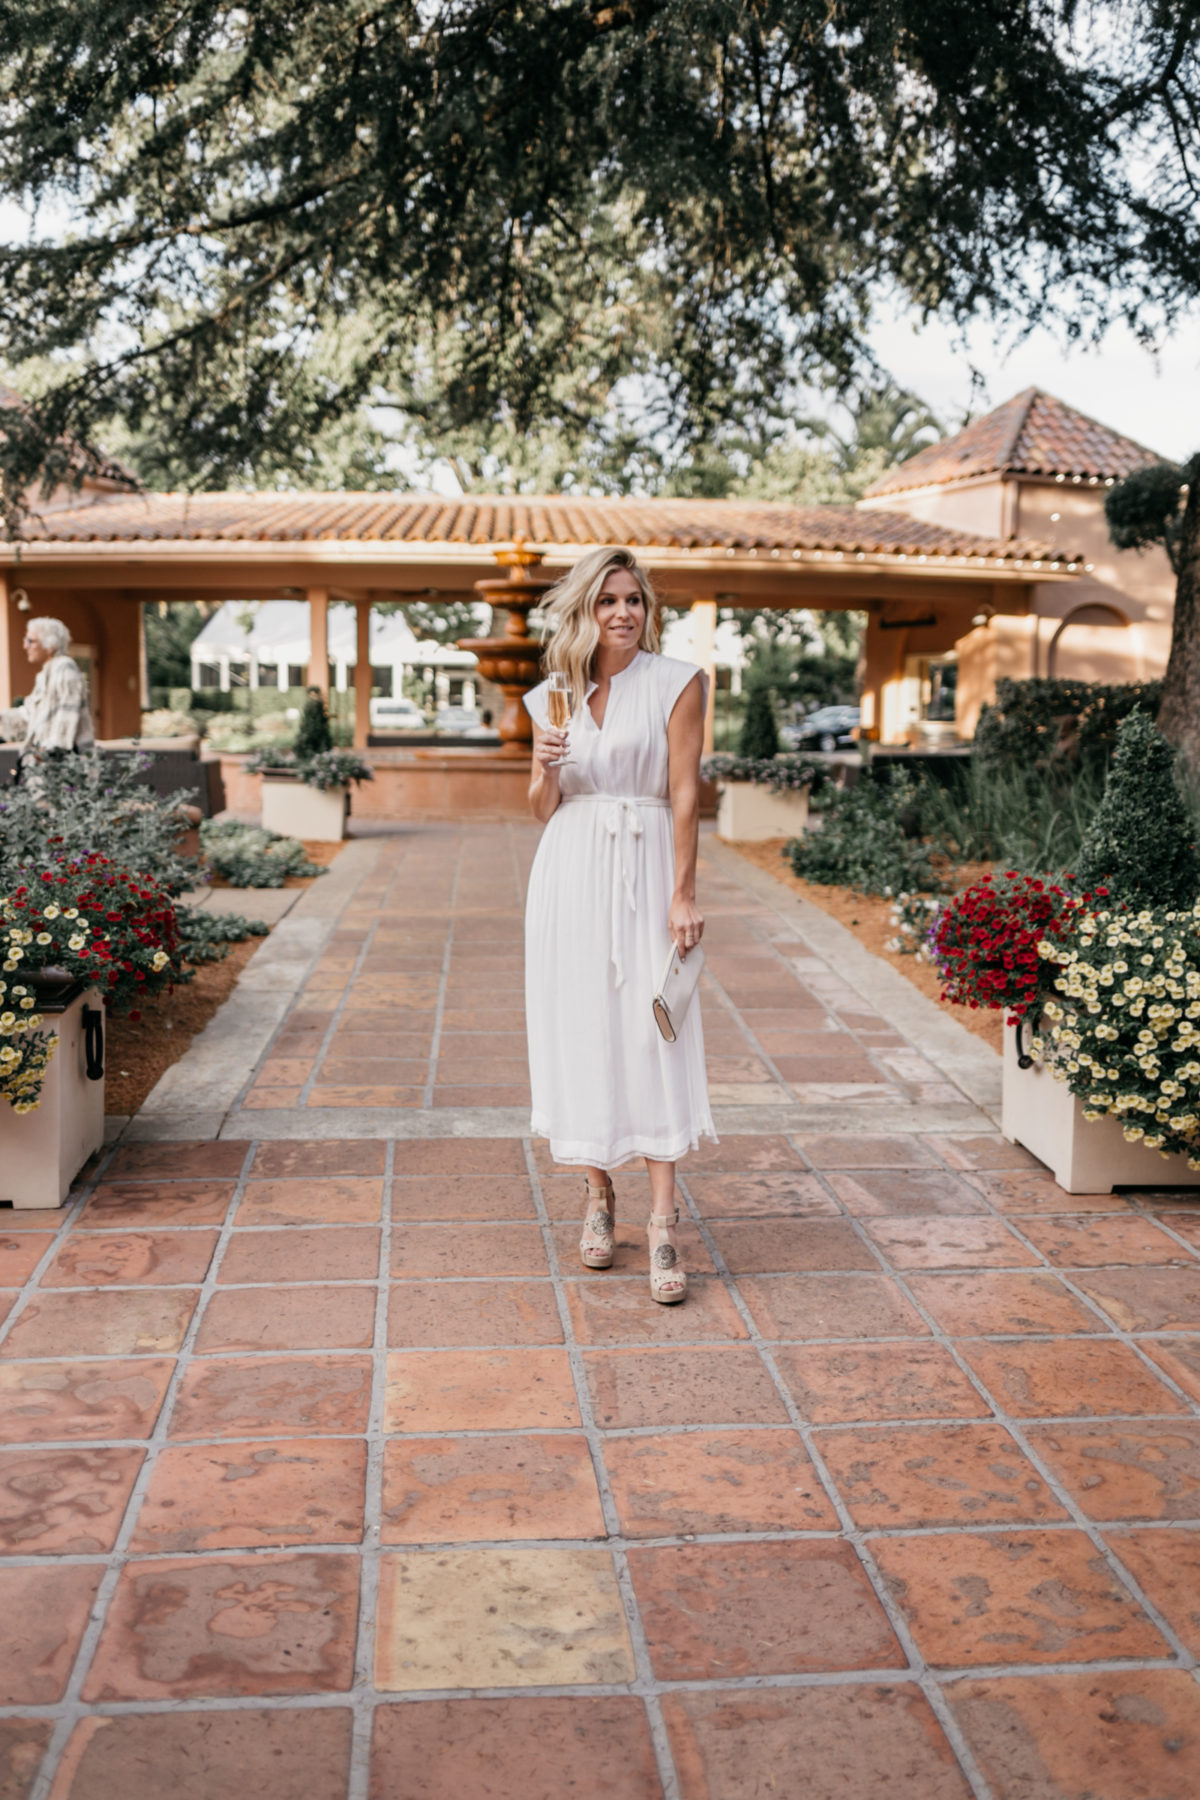 brooke in sonoma for the wine country travel guide